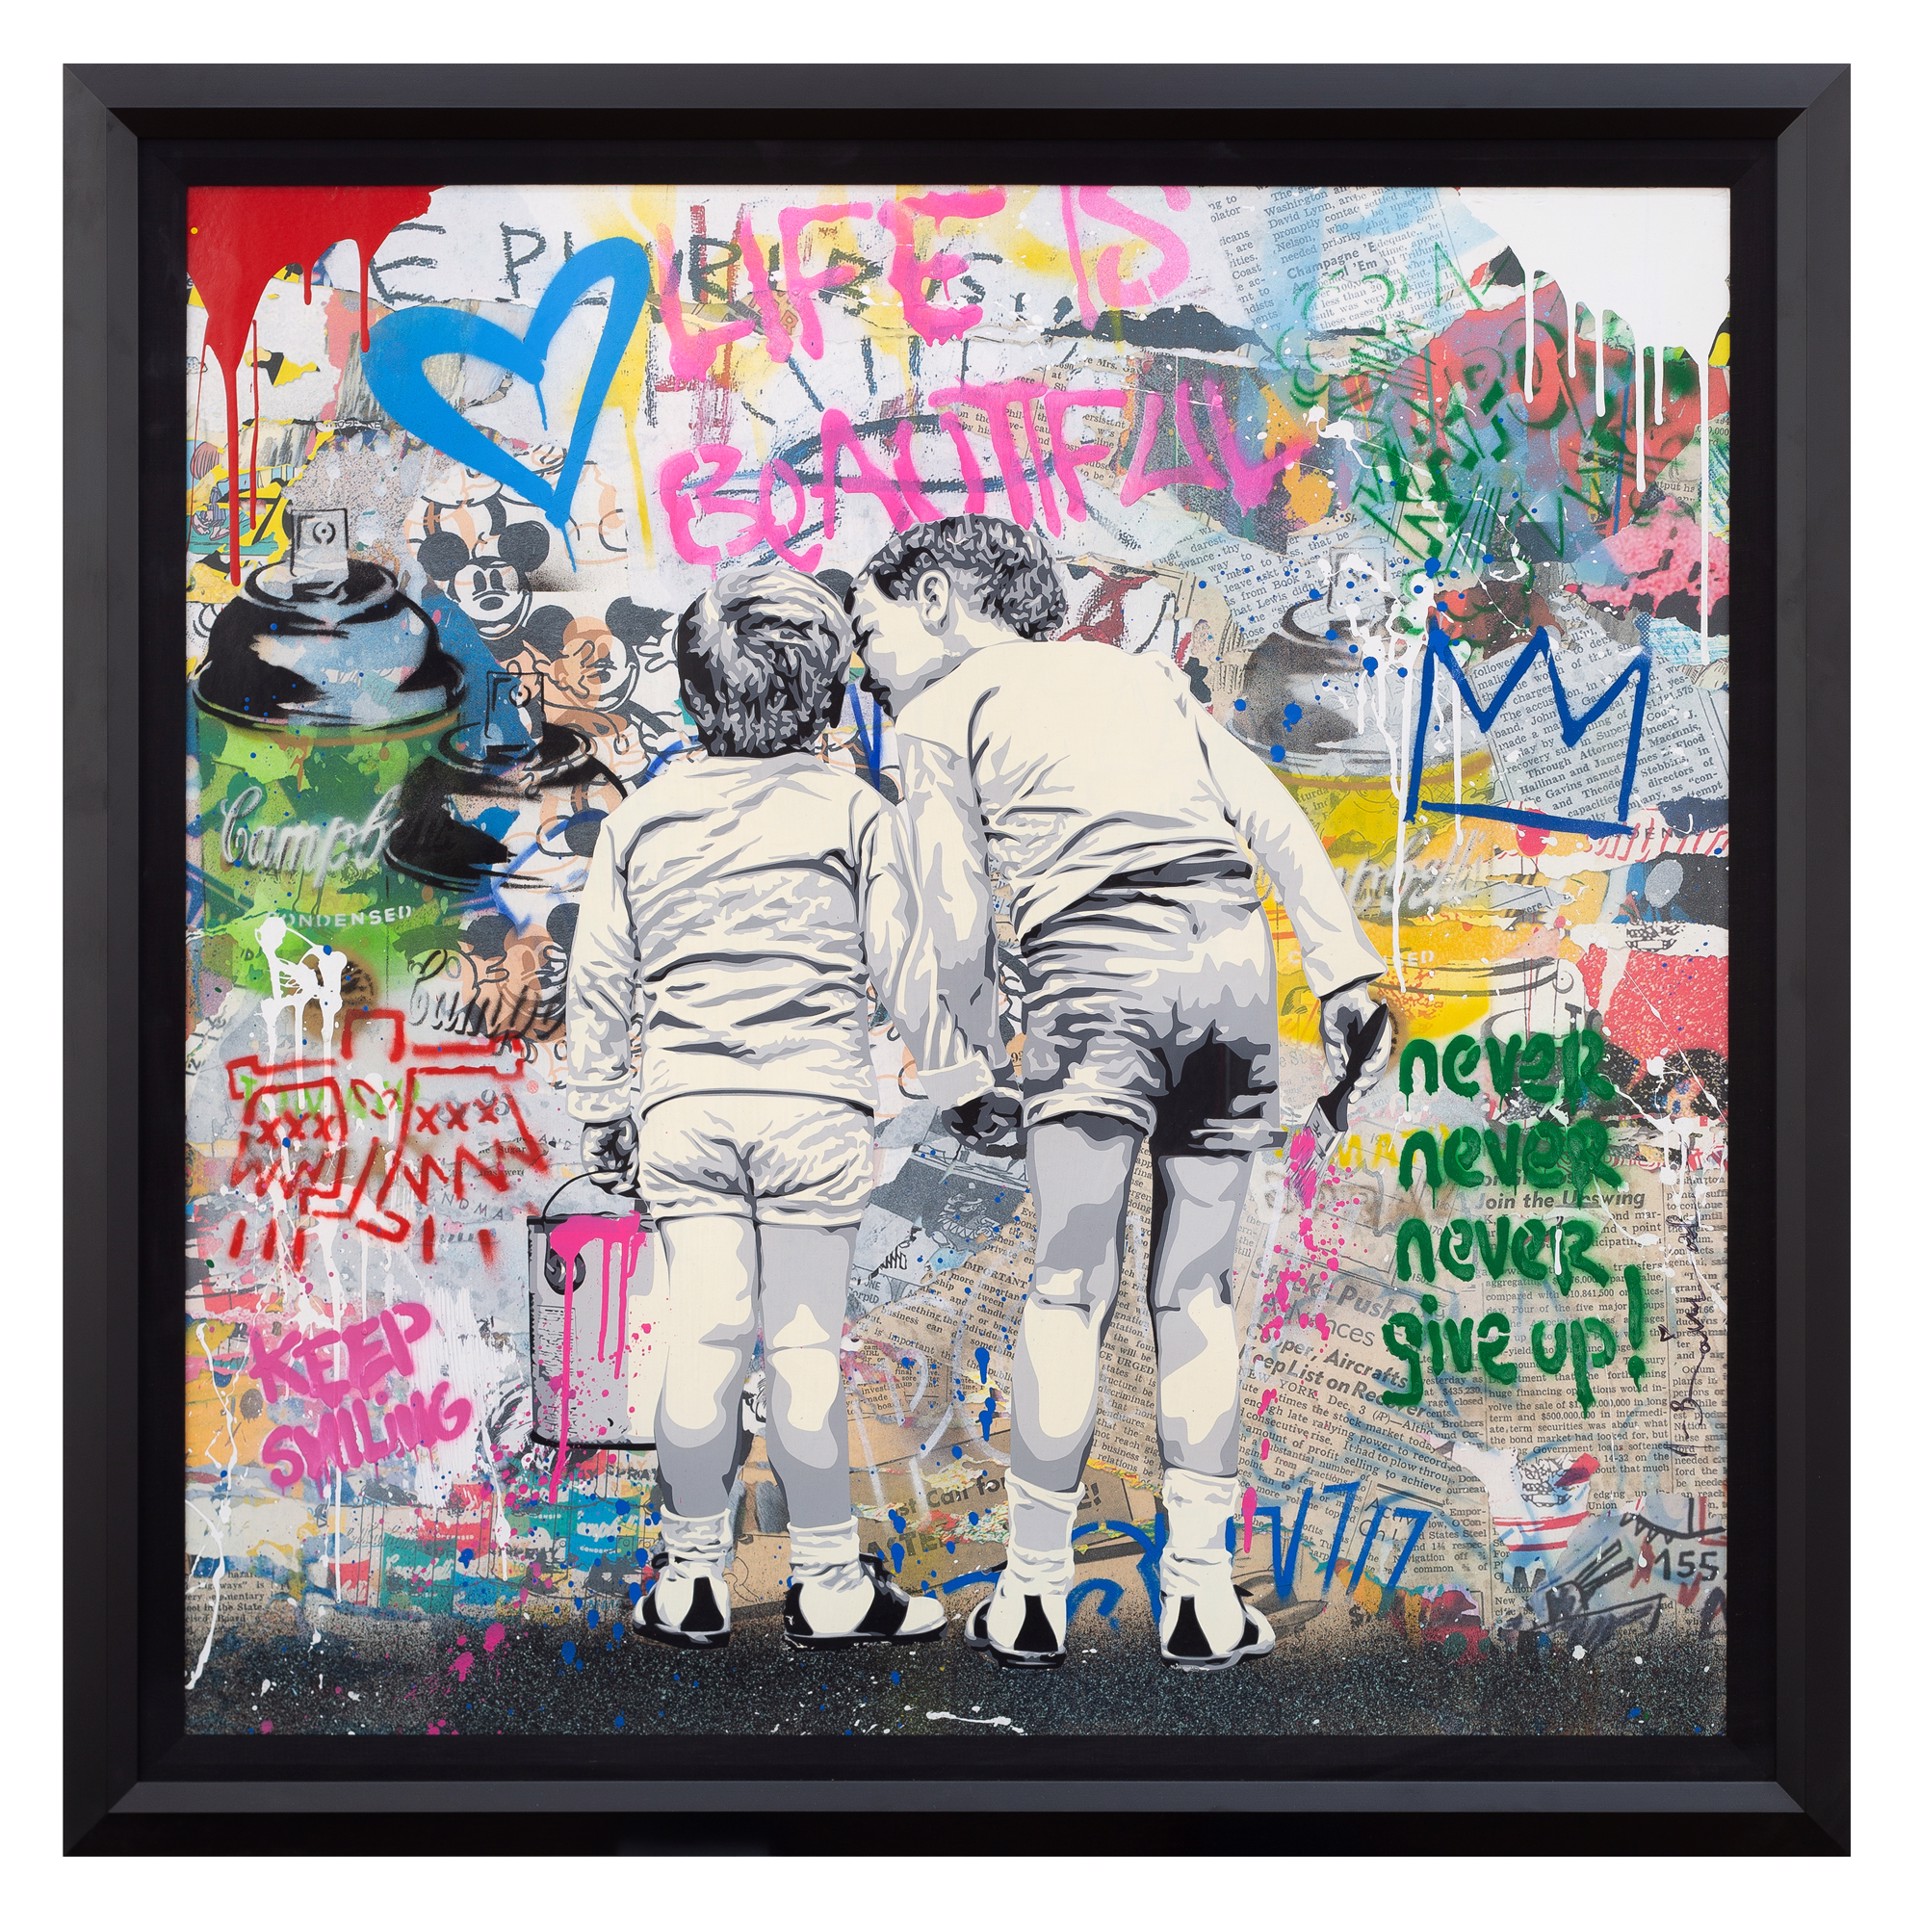 Brother's Advice by Mr. Brainwash